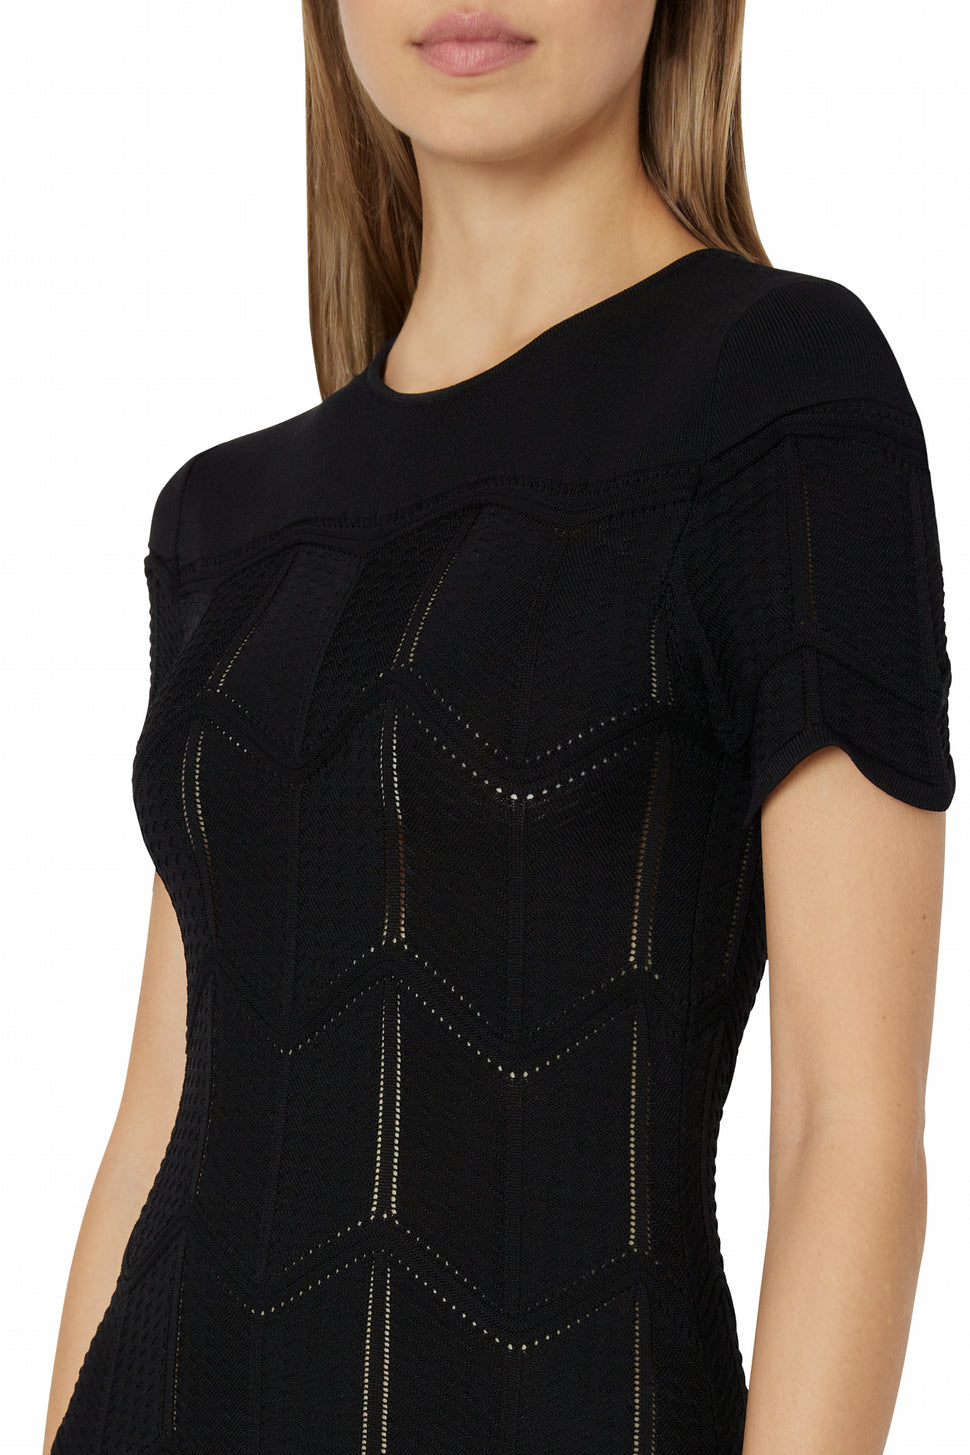 DAZY Solid Pointelle Knit Top Without Bra